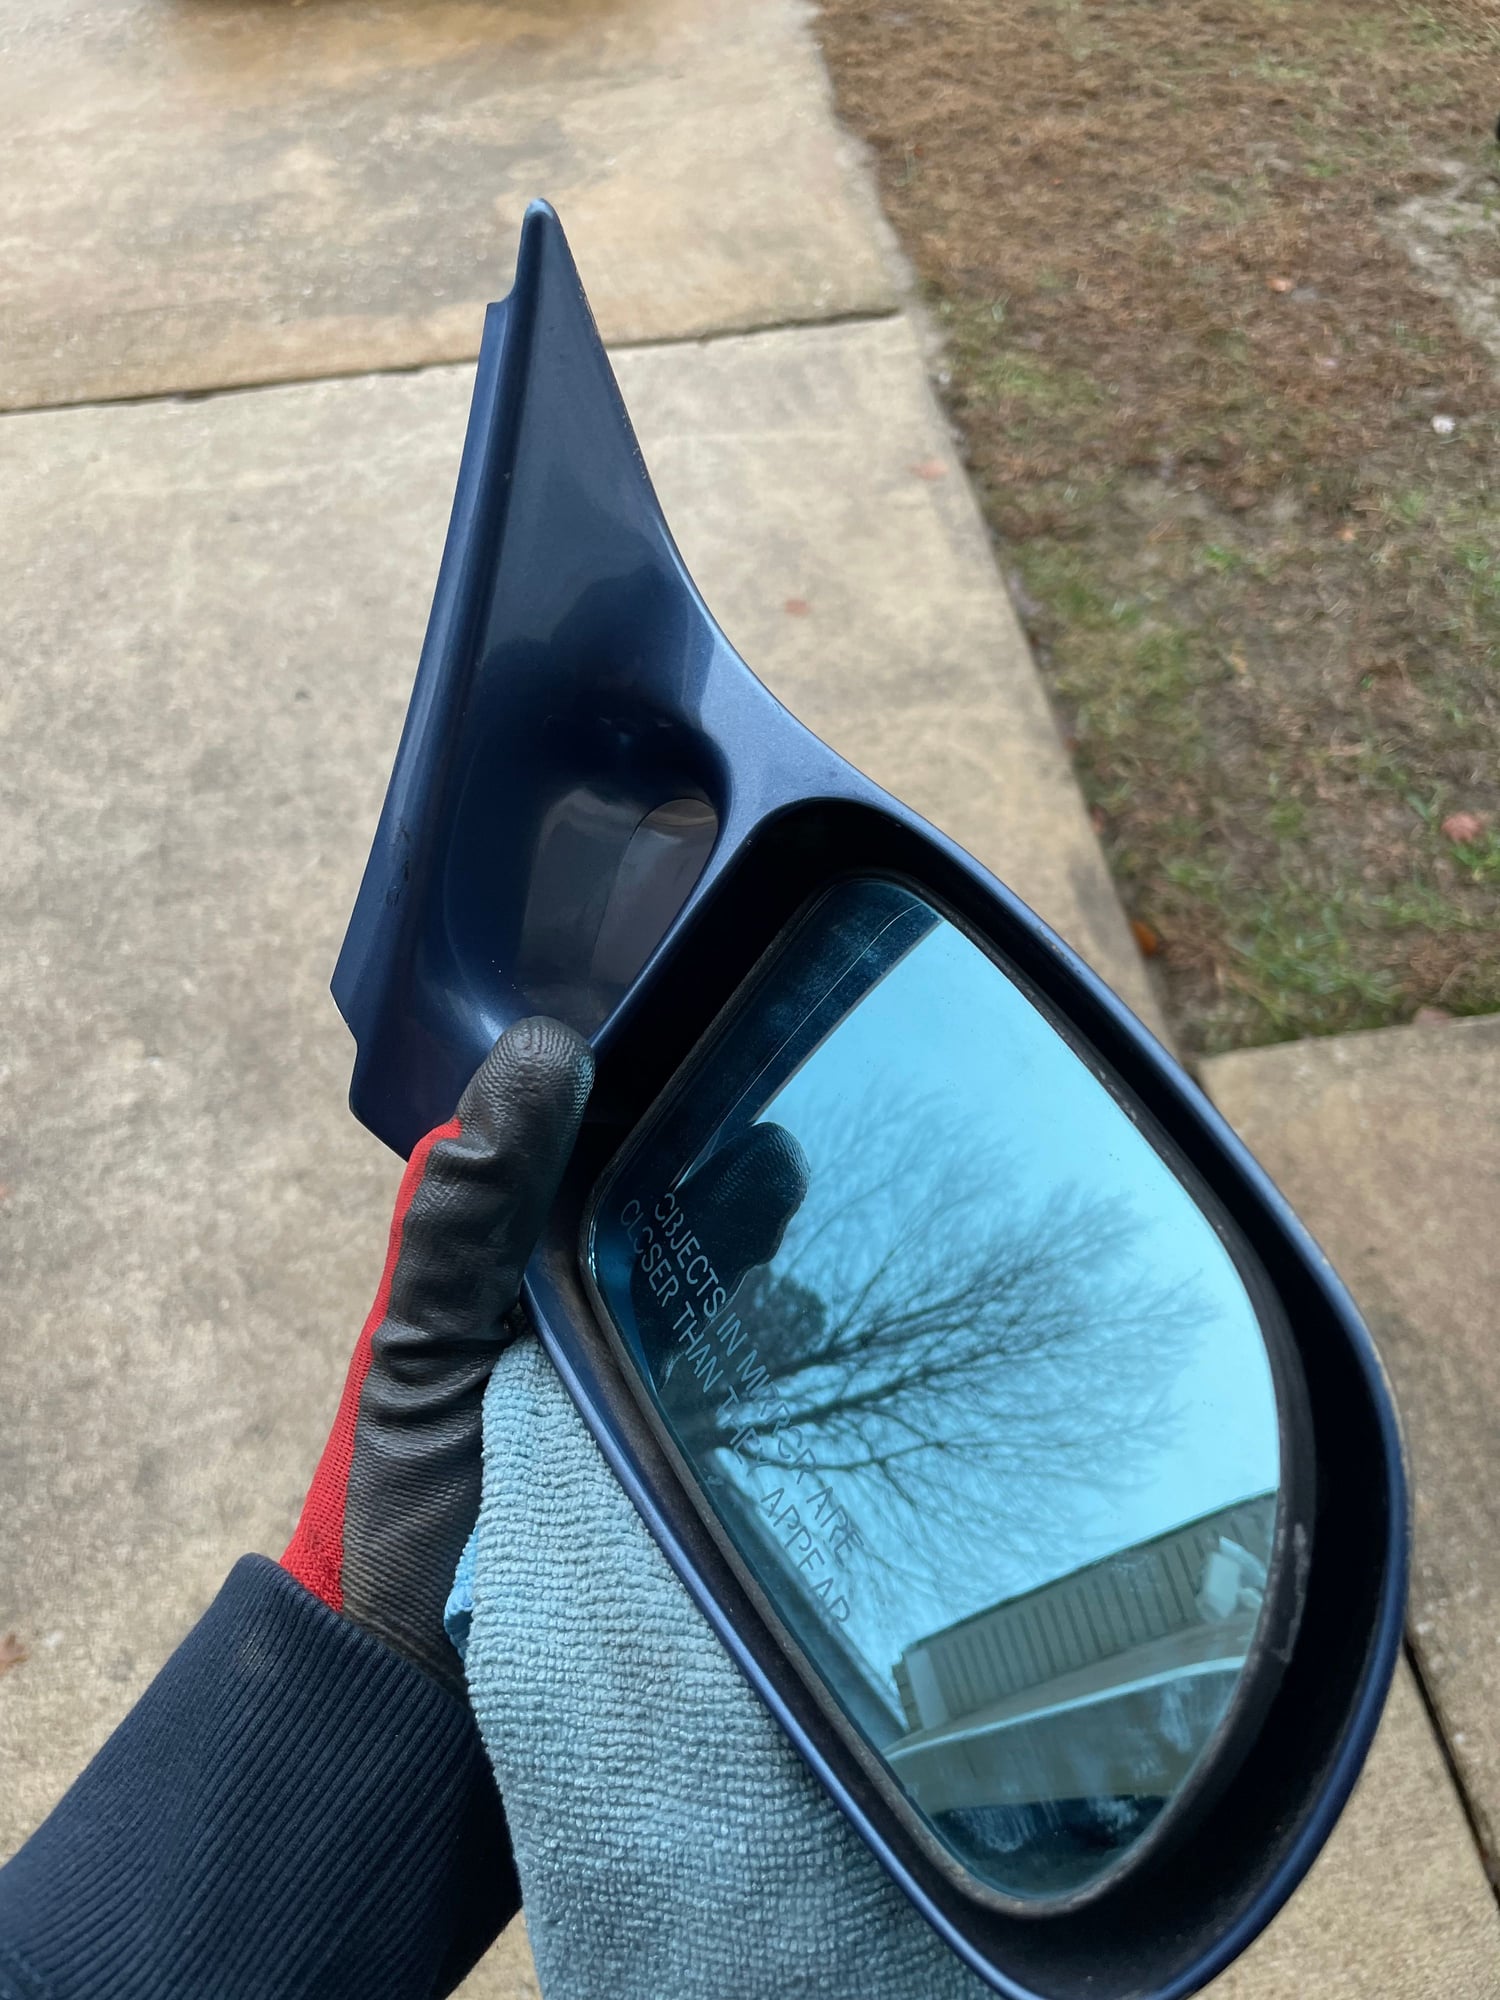 Exterior Body Parts - Side mirror - Used - 1989 to 1991 Mazda RX-7 - Saint Louis, MO 63114, United States